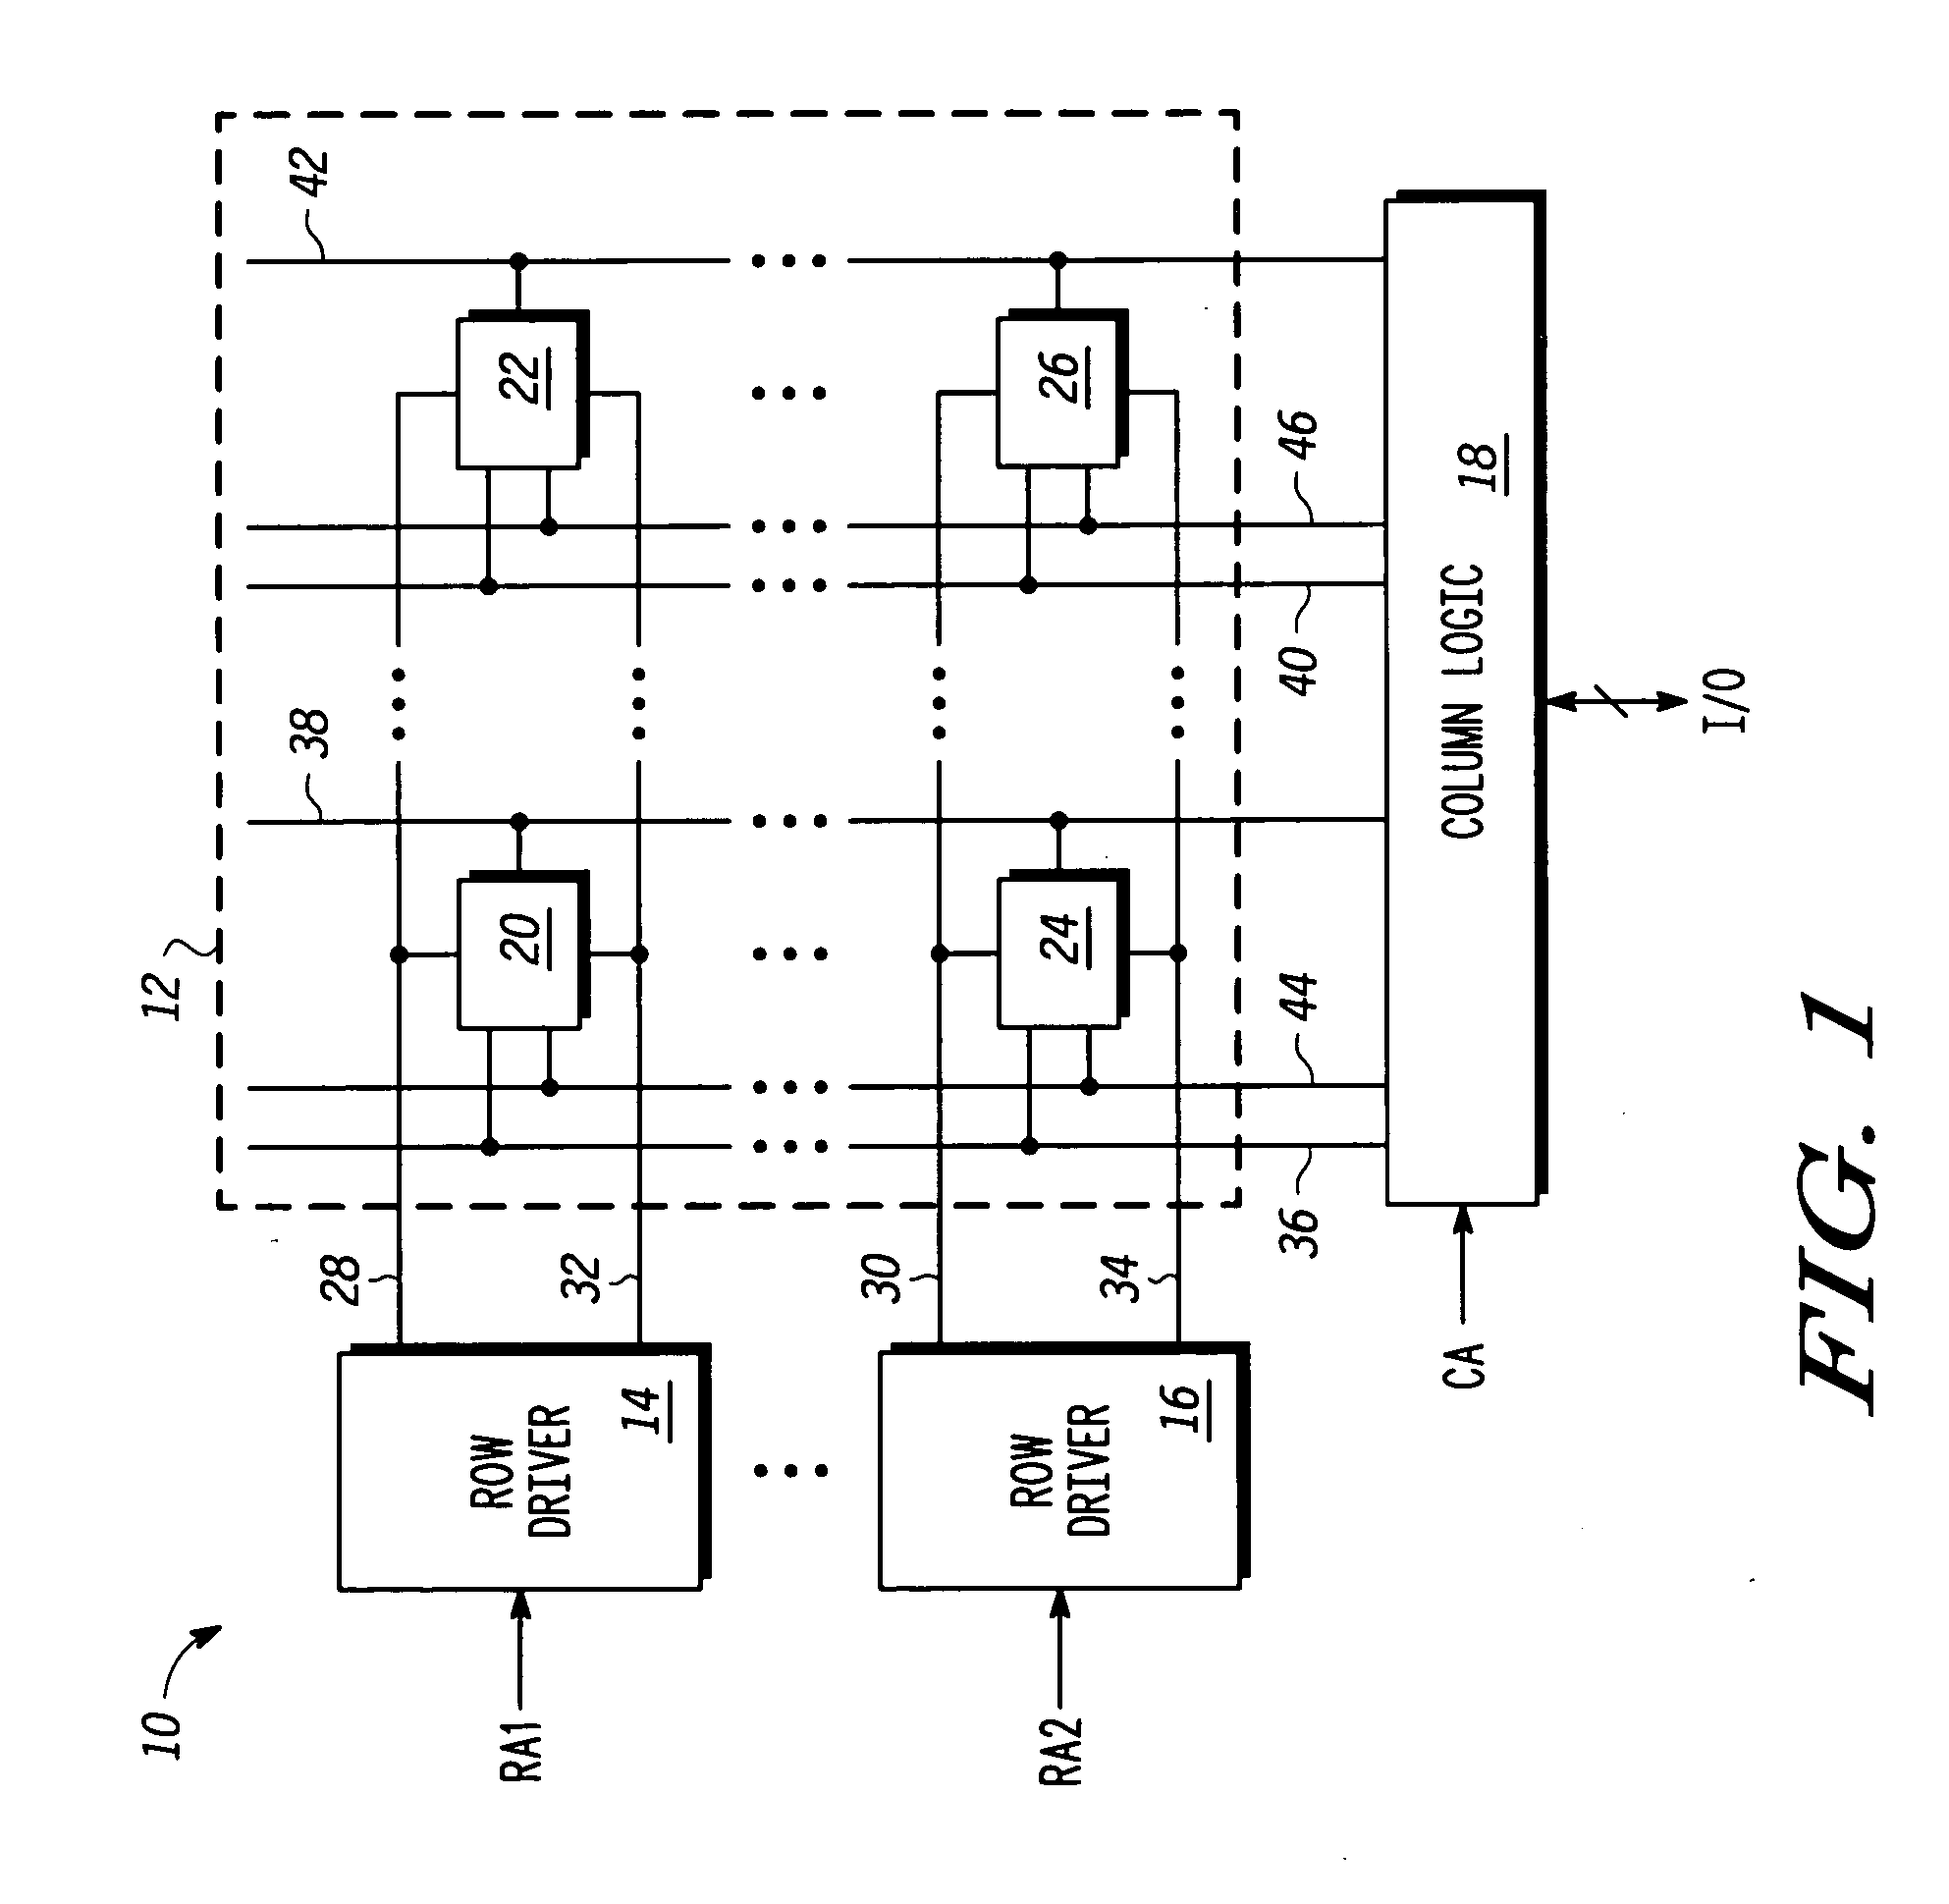 Method and apparatus for low voltage write in a static random access memory